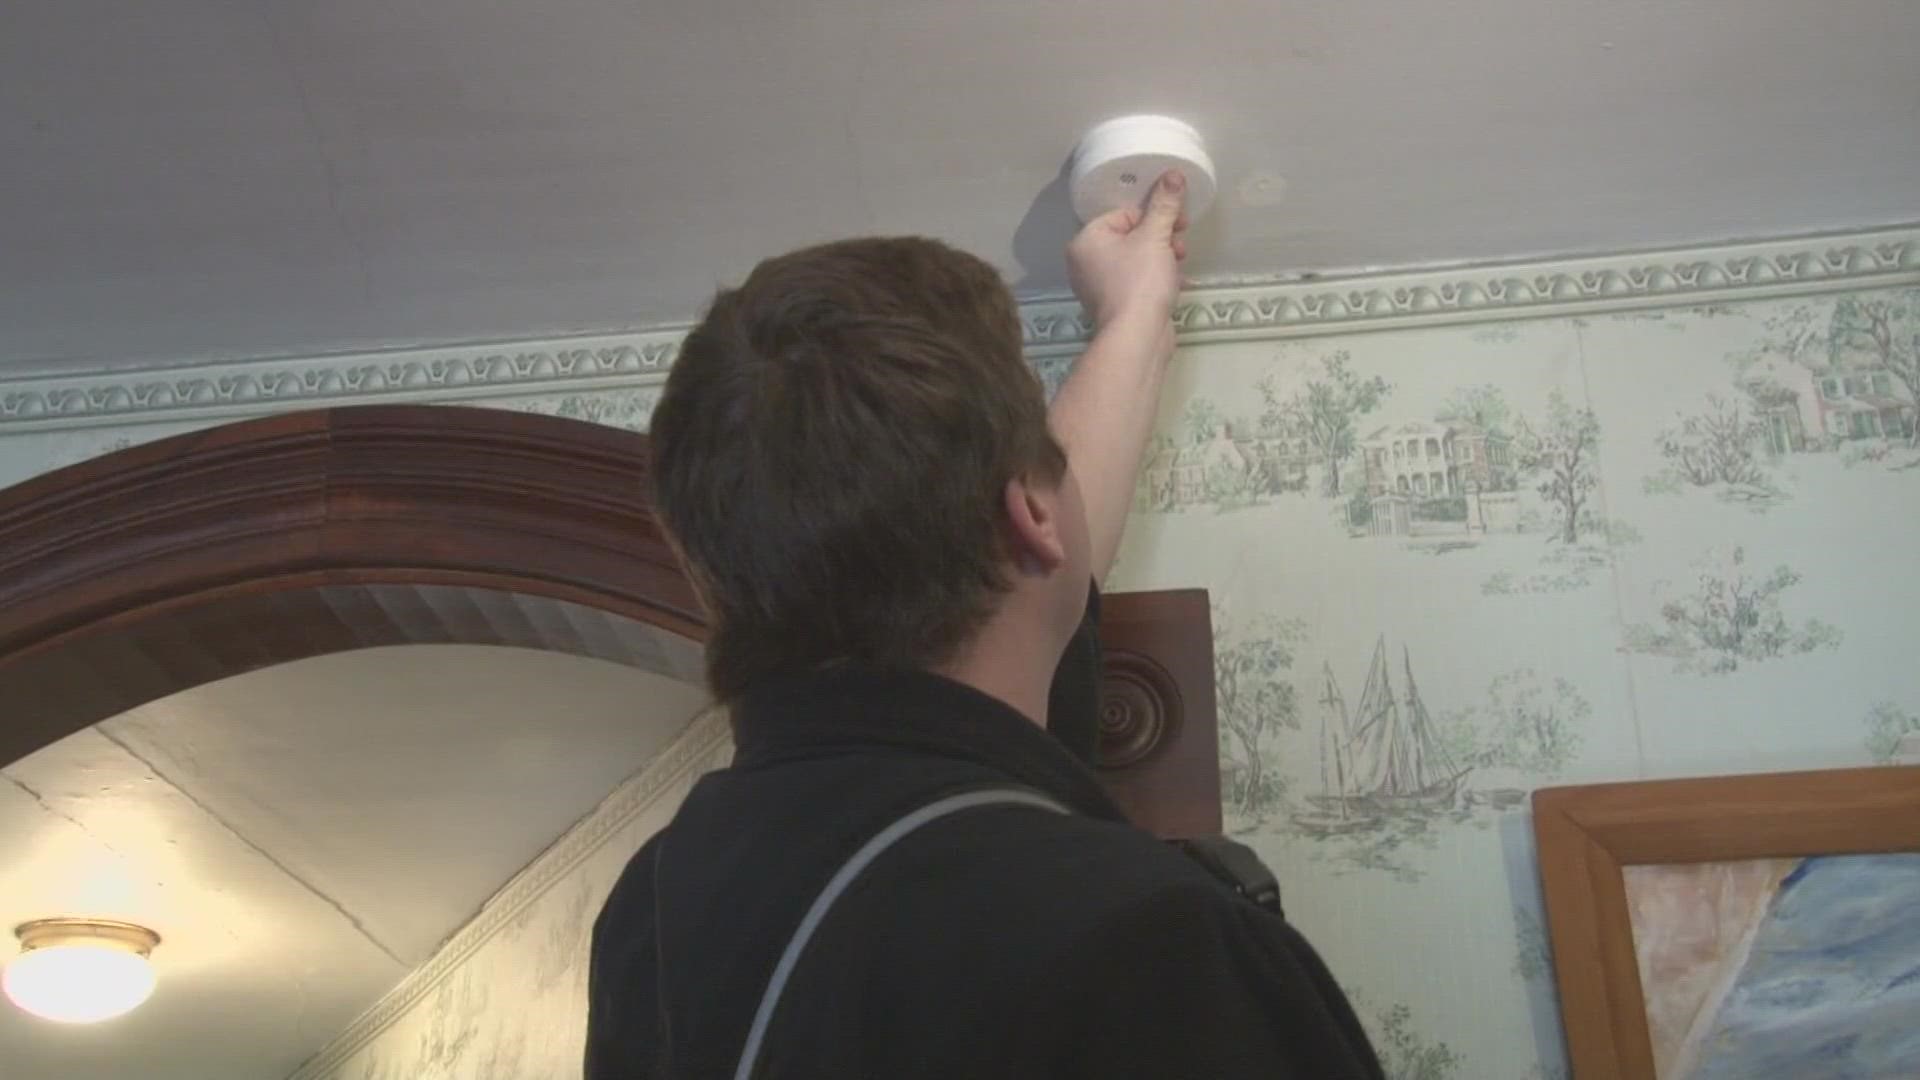 October is National Fire Prevention Month, Maine fire officials are urging people to have working smoke detectors and to have an escape plan.